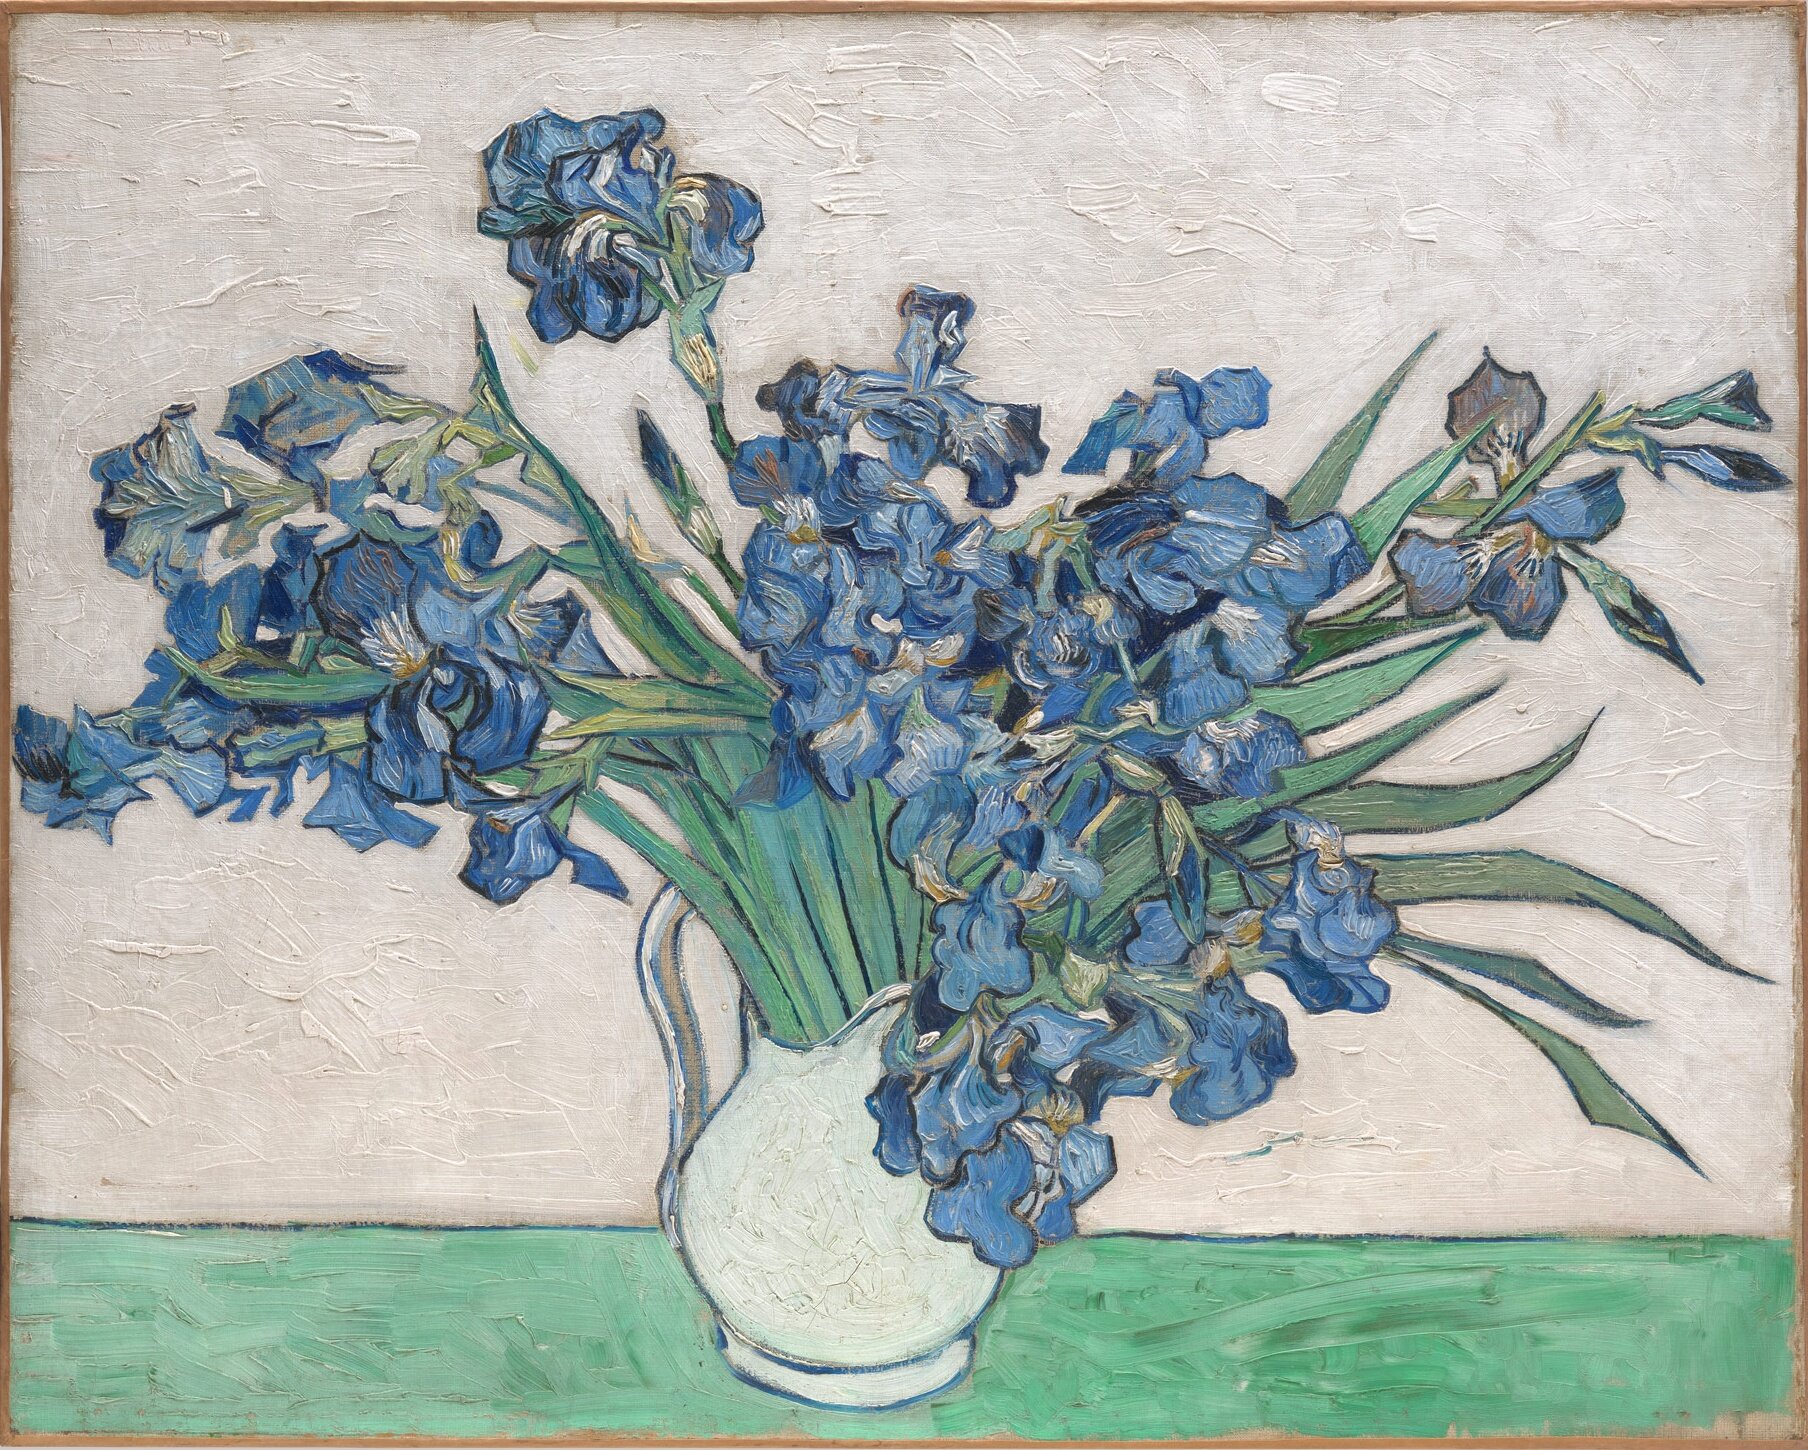 Vincent Van Gogh Iris painting in Analogous colors of Blue, Violet, Green